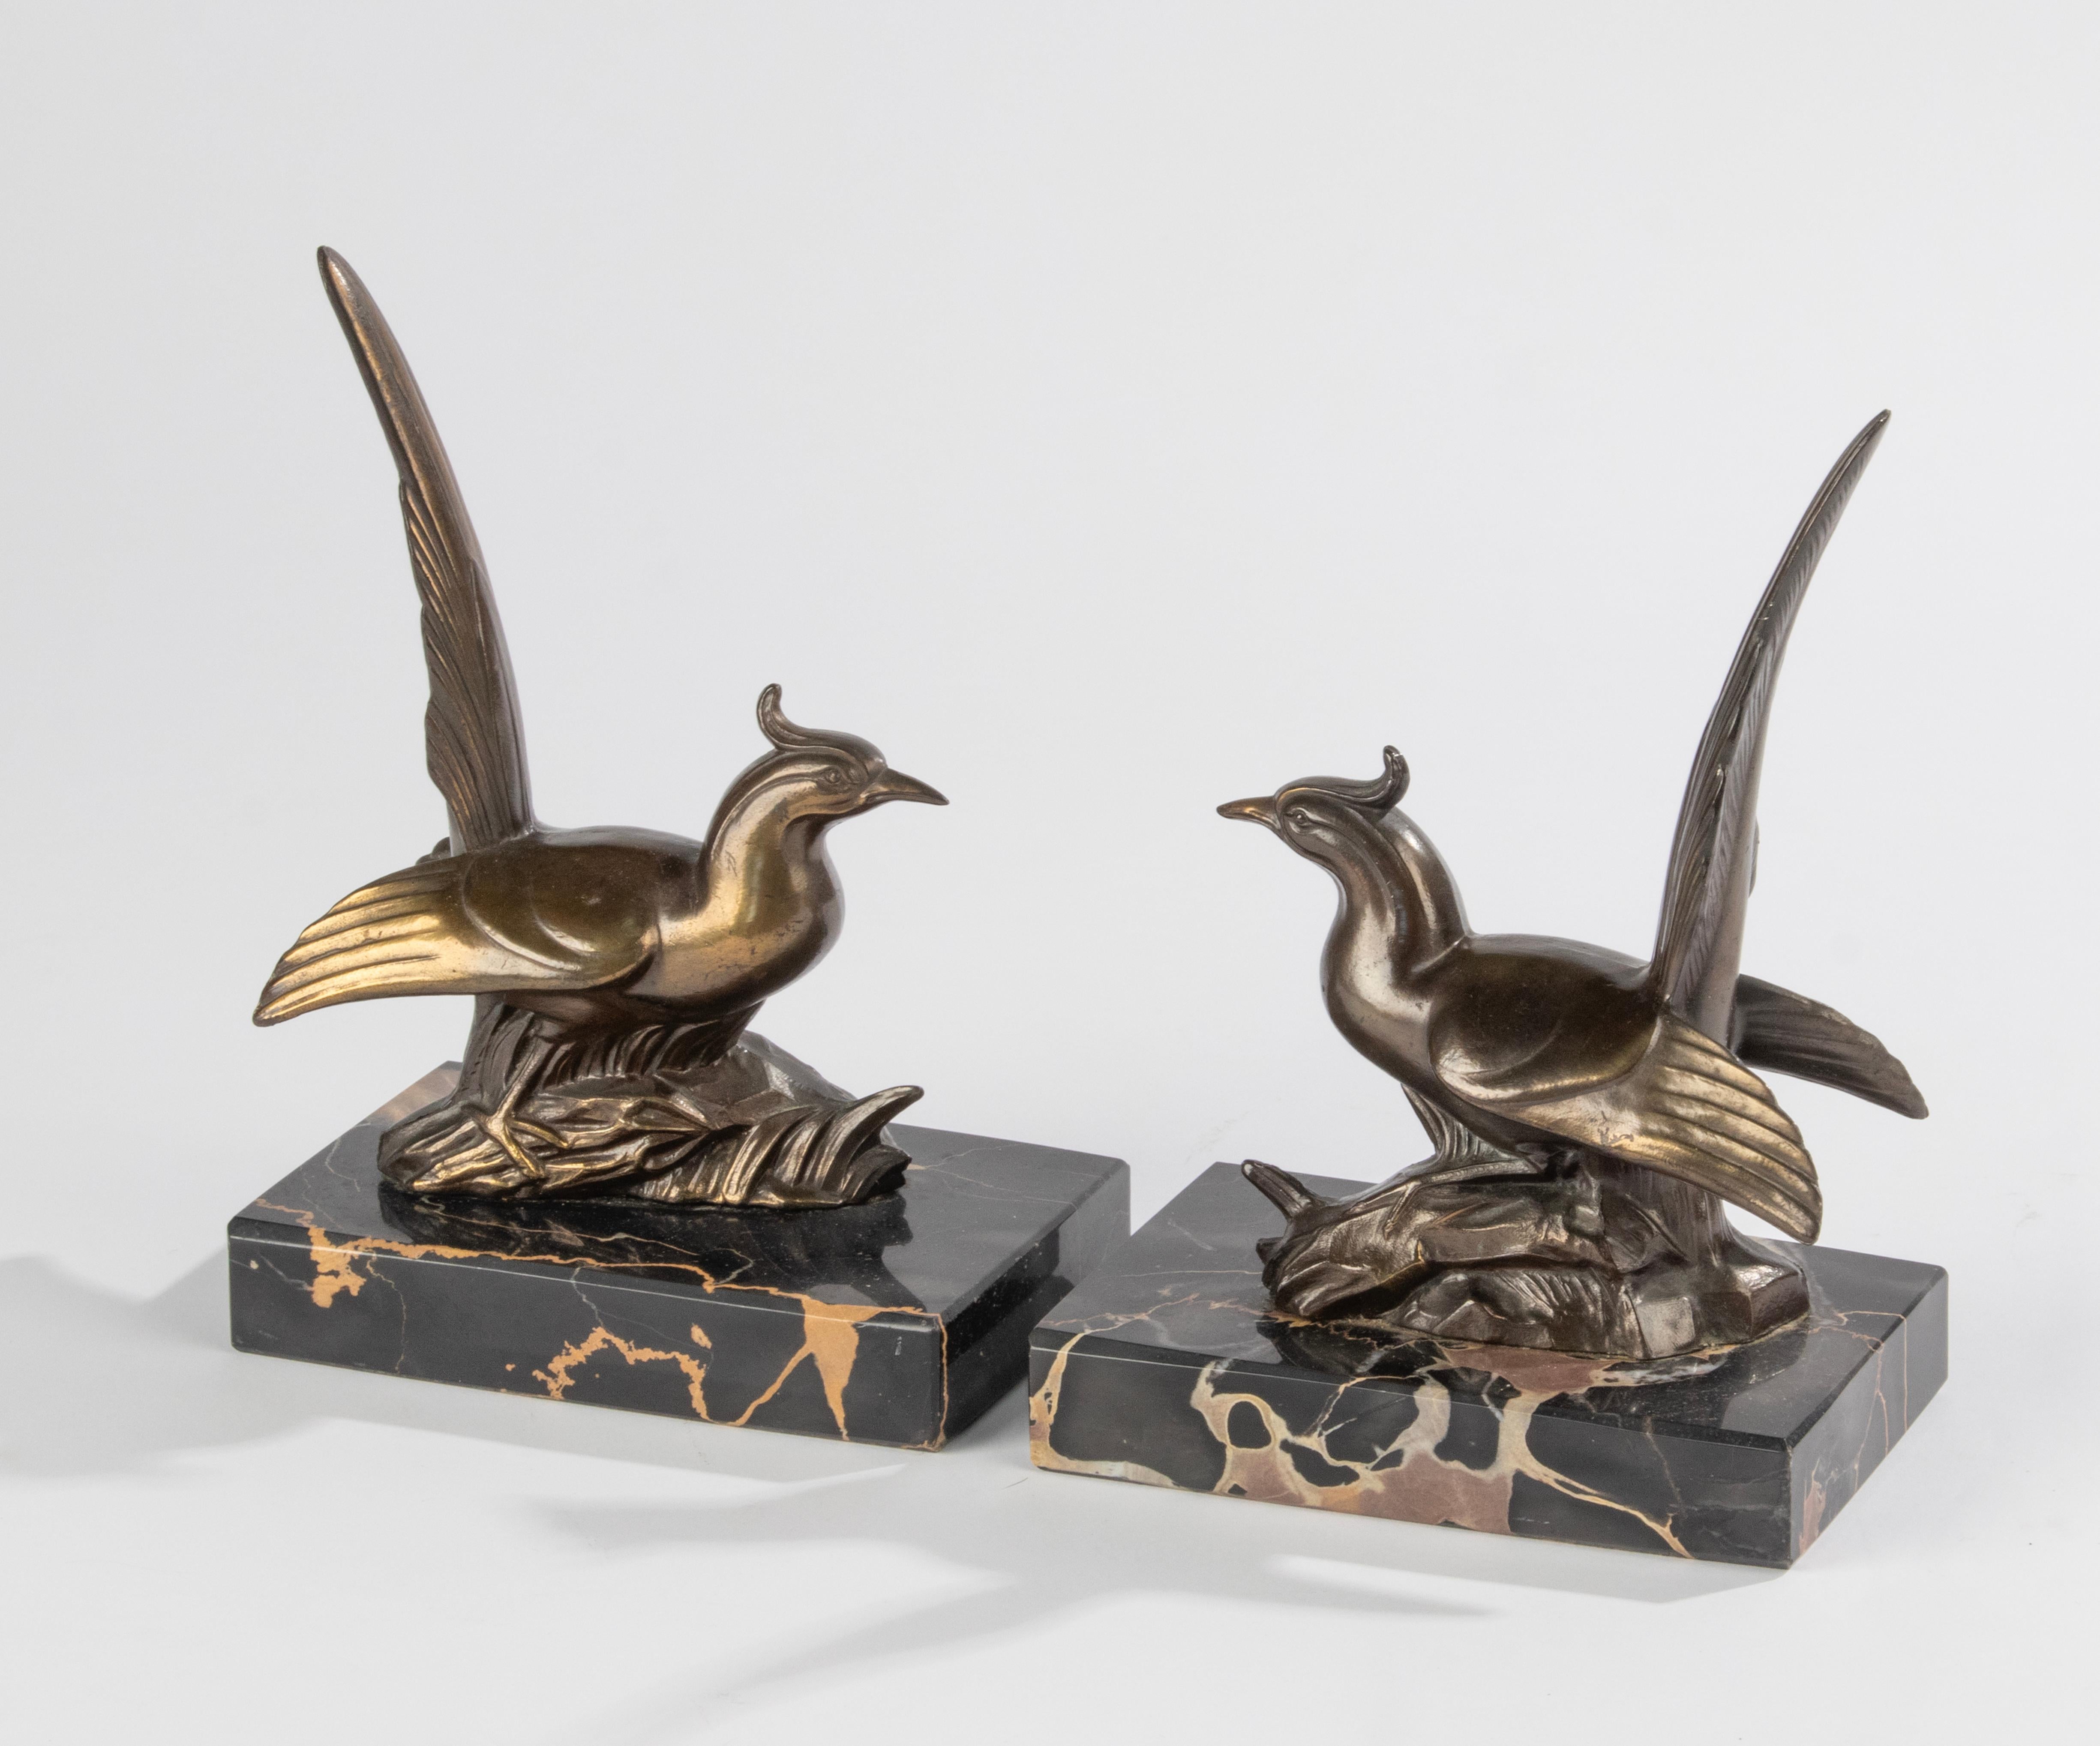 A pair of Art Deco period bookends, with sculptures of pheasant birds. The figurines are made of bronze color patinated spelter (zinc alloy). The plinths are made of Porto Nero Marble. All in good condition. Made in France, around